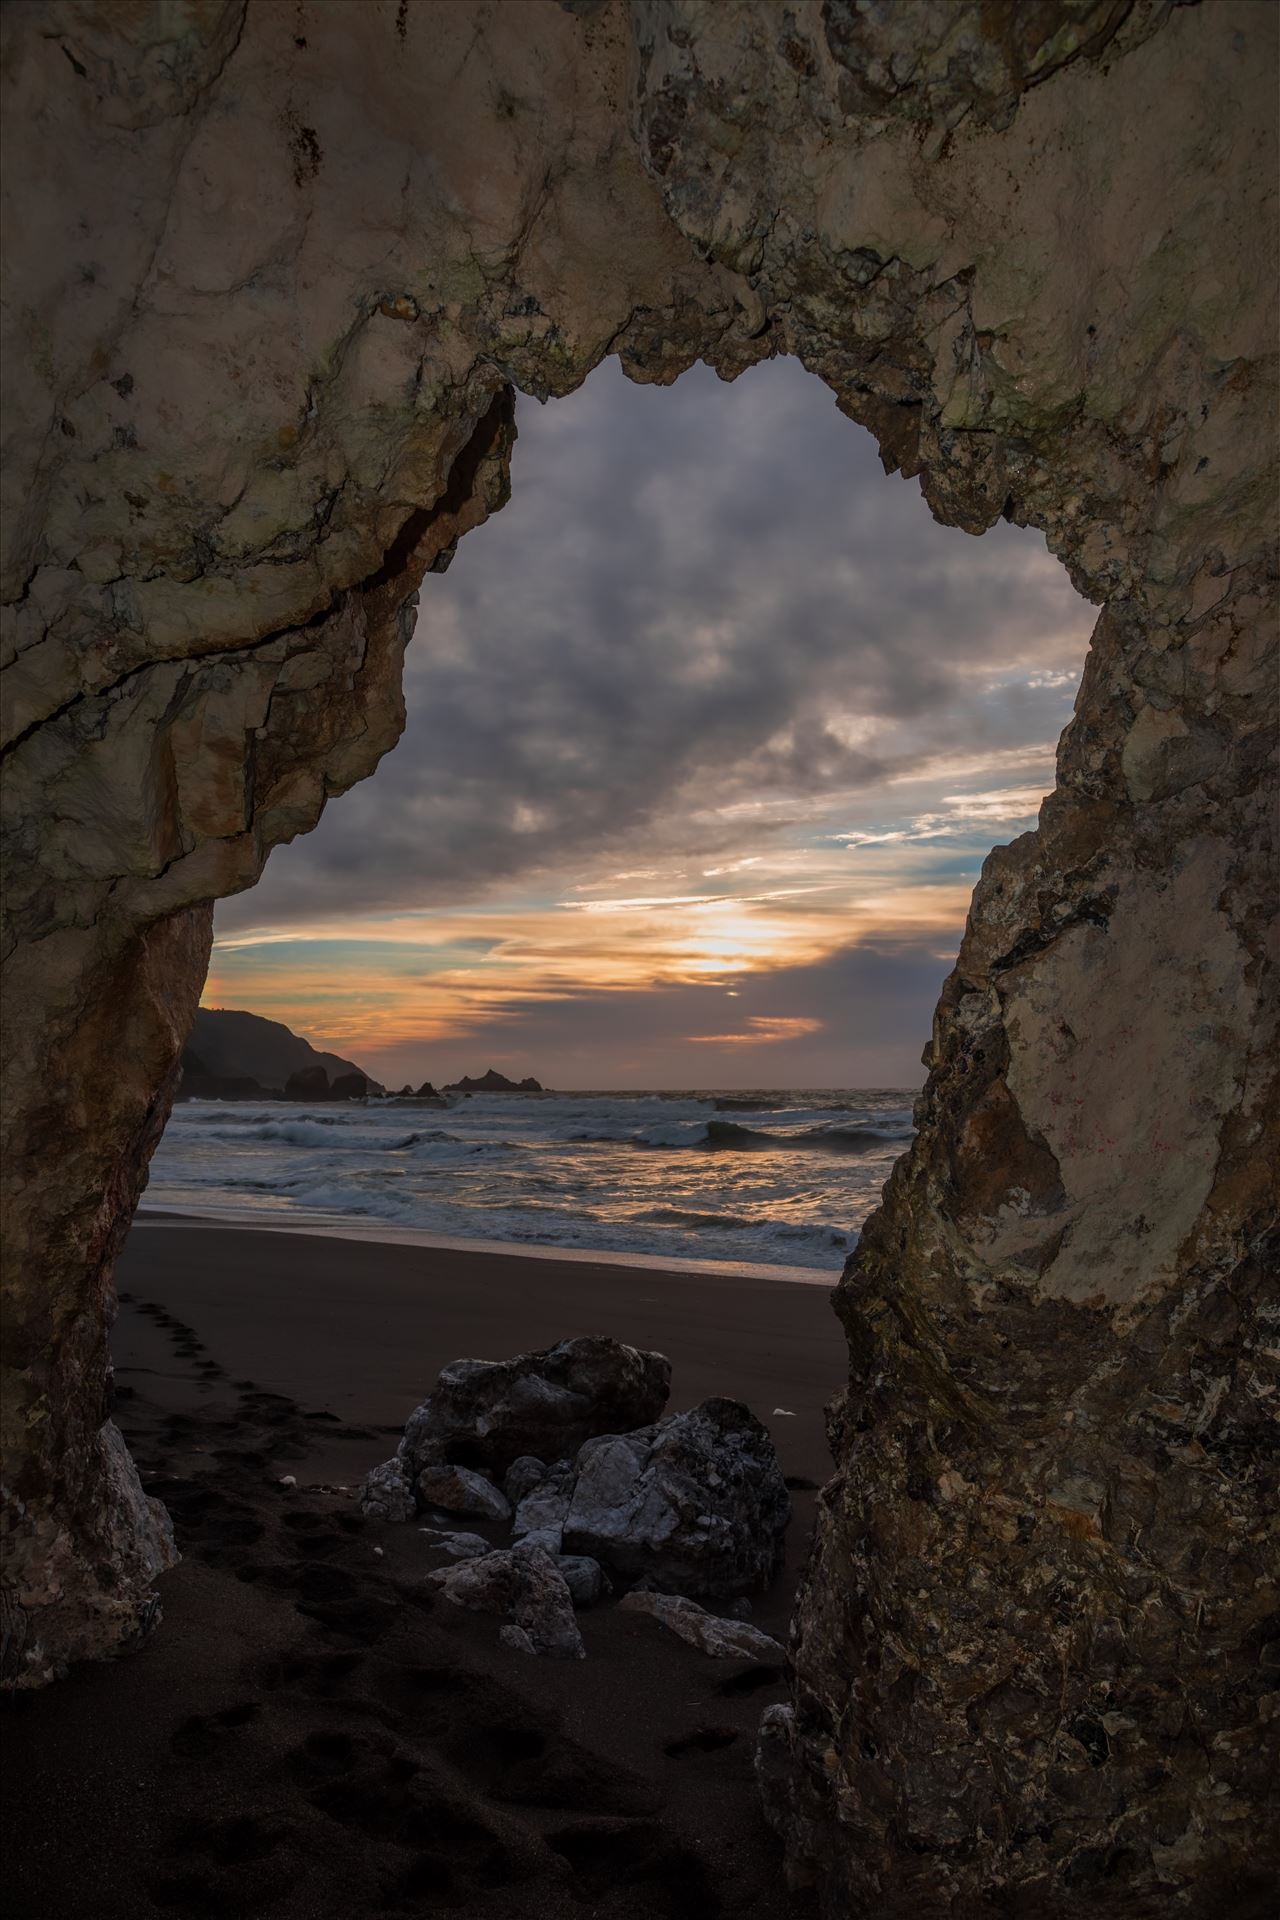 Inside Looking Out - View over the ocean toward Pedro Point in Pacifica, CA from a cave at Rockaway Beach. by Denise Buckley Crawford